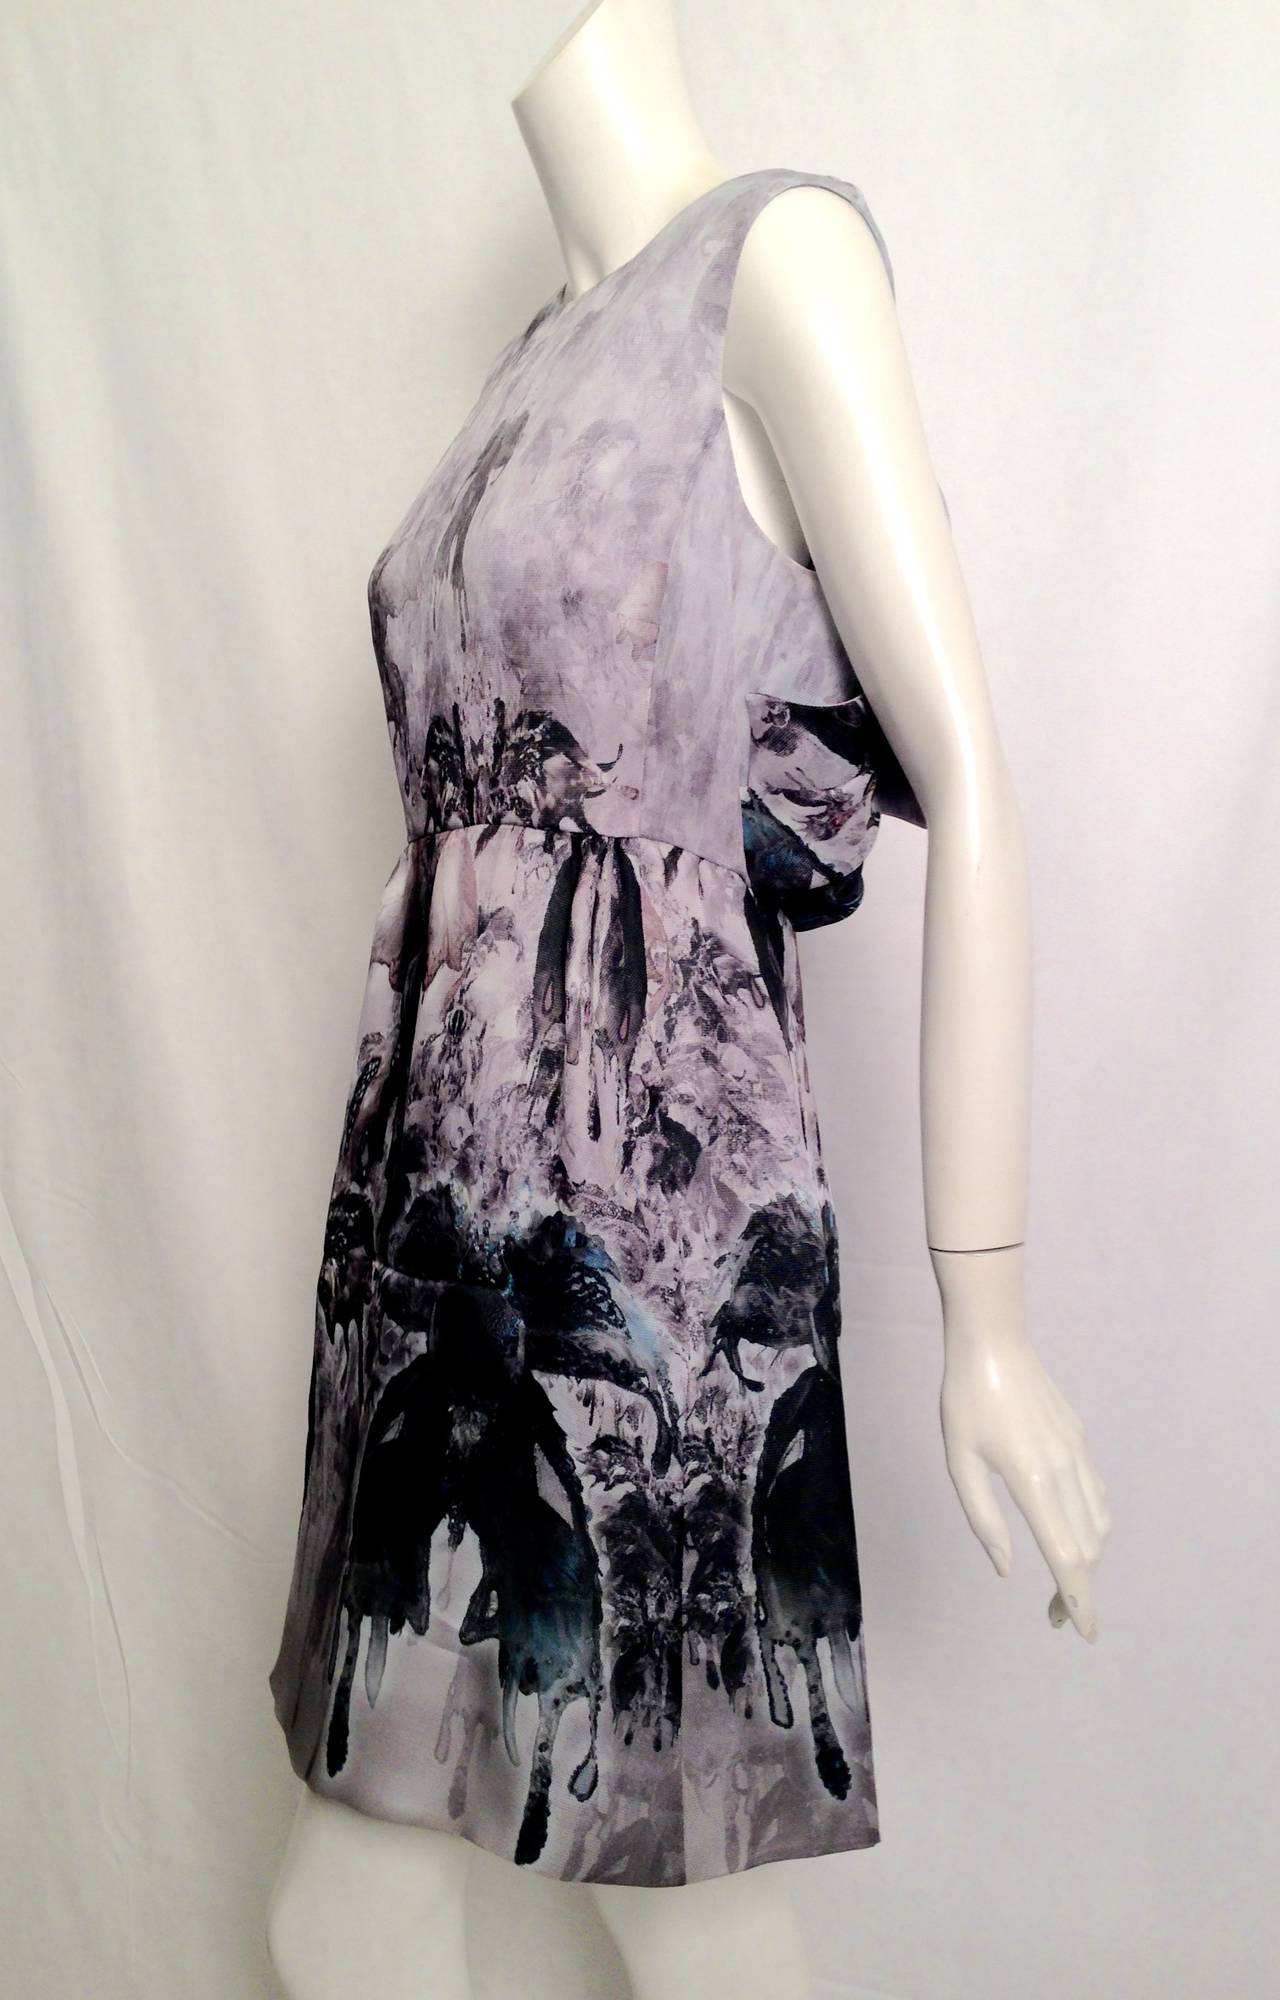 Leave them all in awe when arriving in this simply beautiful dress by the Italian Haute Couturier Valentino Garavani!  The abstract print belies the Old World techniques used to create this fantasy.  Dress is entirely lined in luxurious silk and has